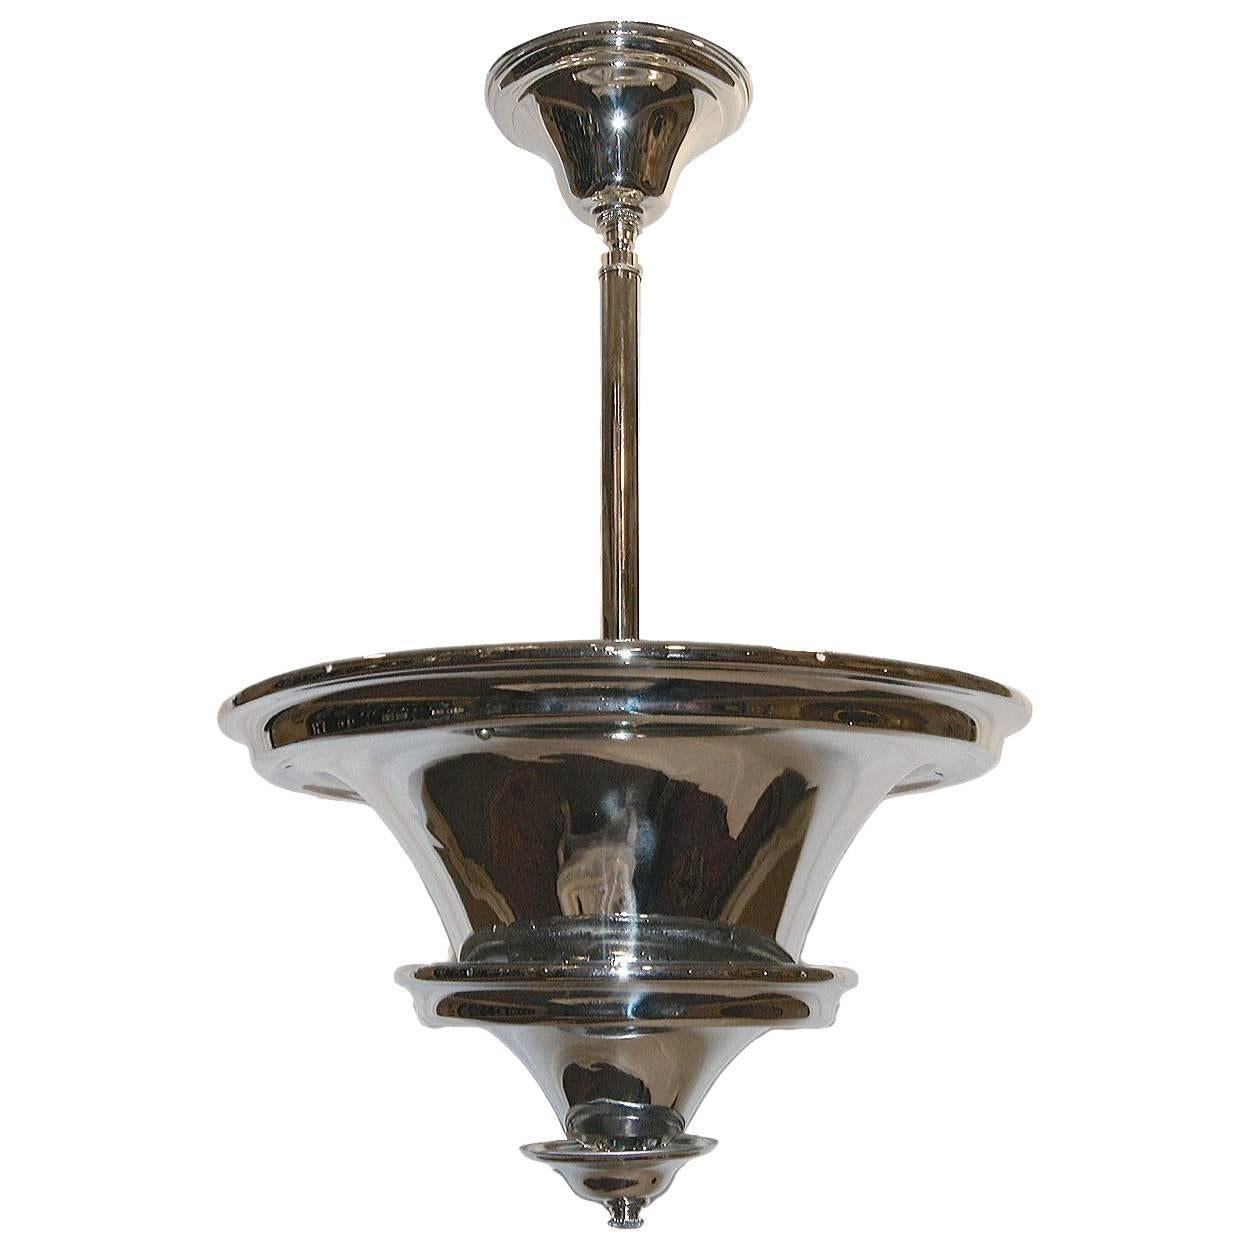 Pair of Nickel Plated Light Fixtures, Sold Individually